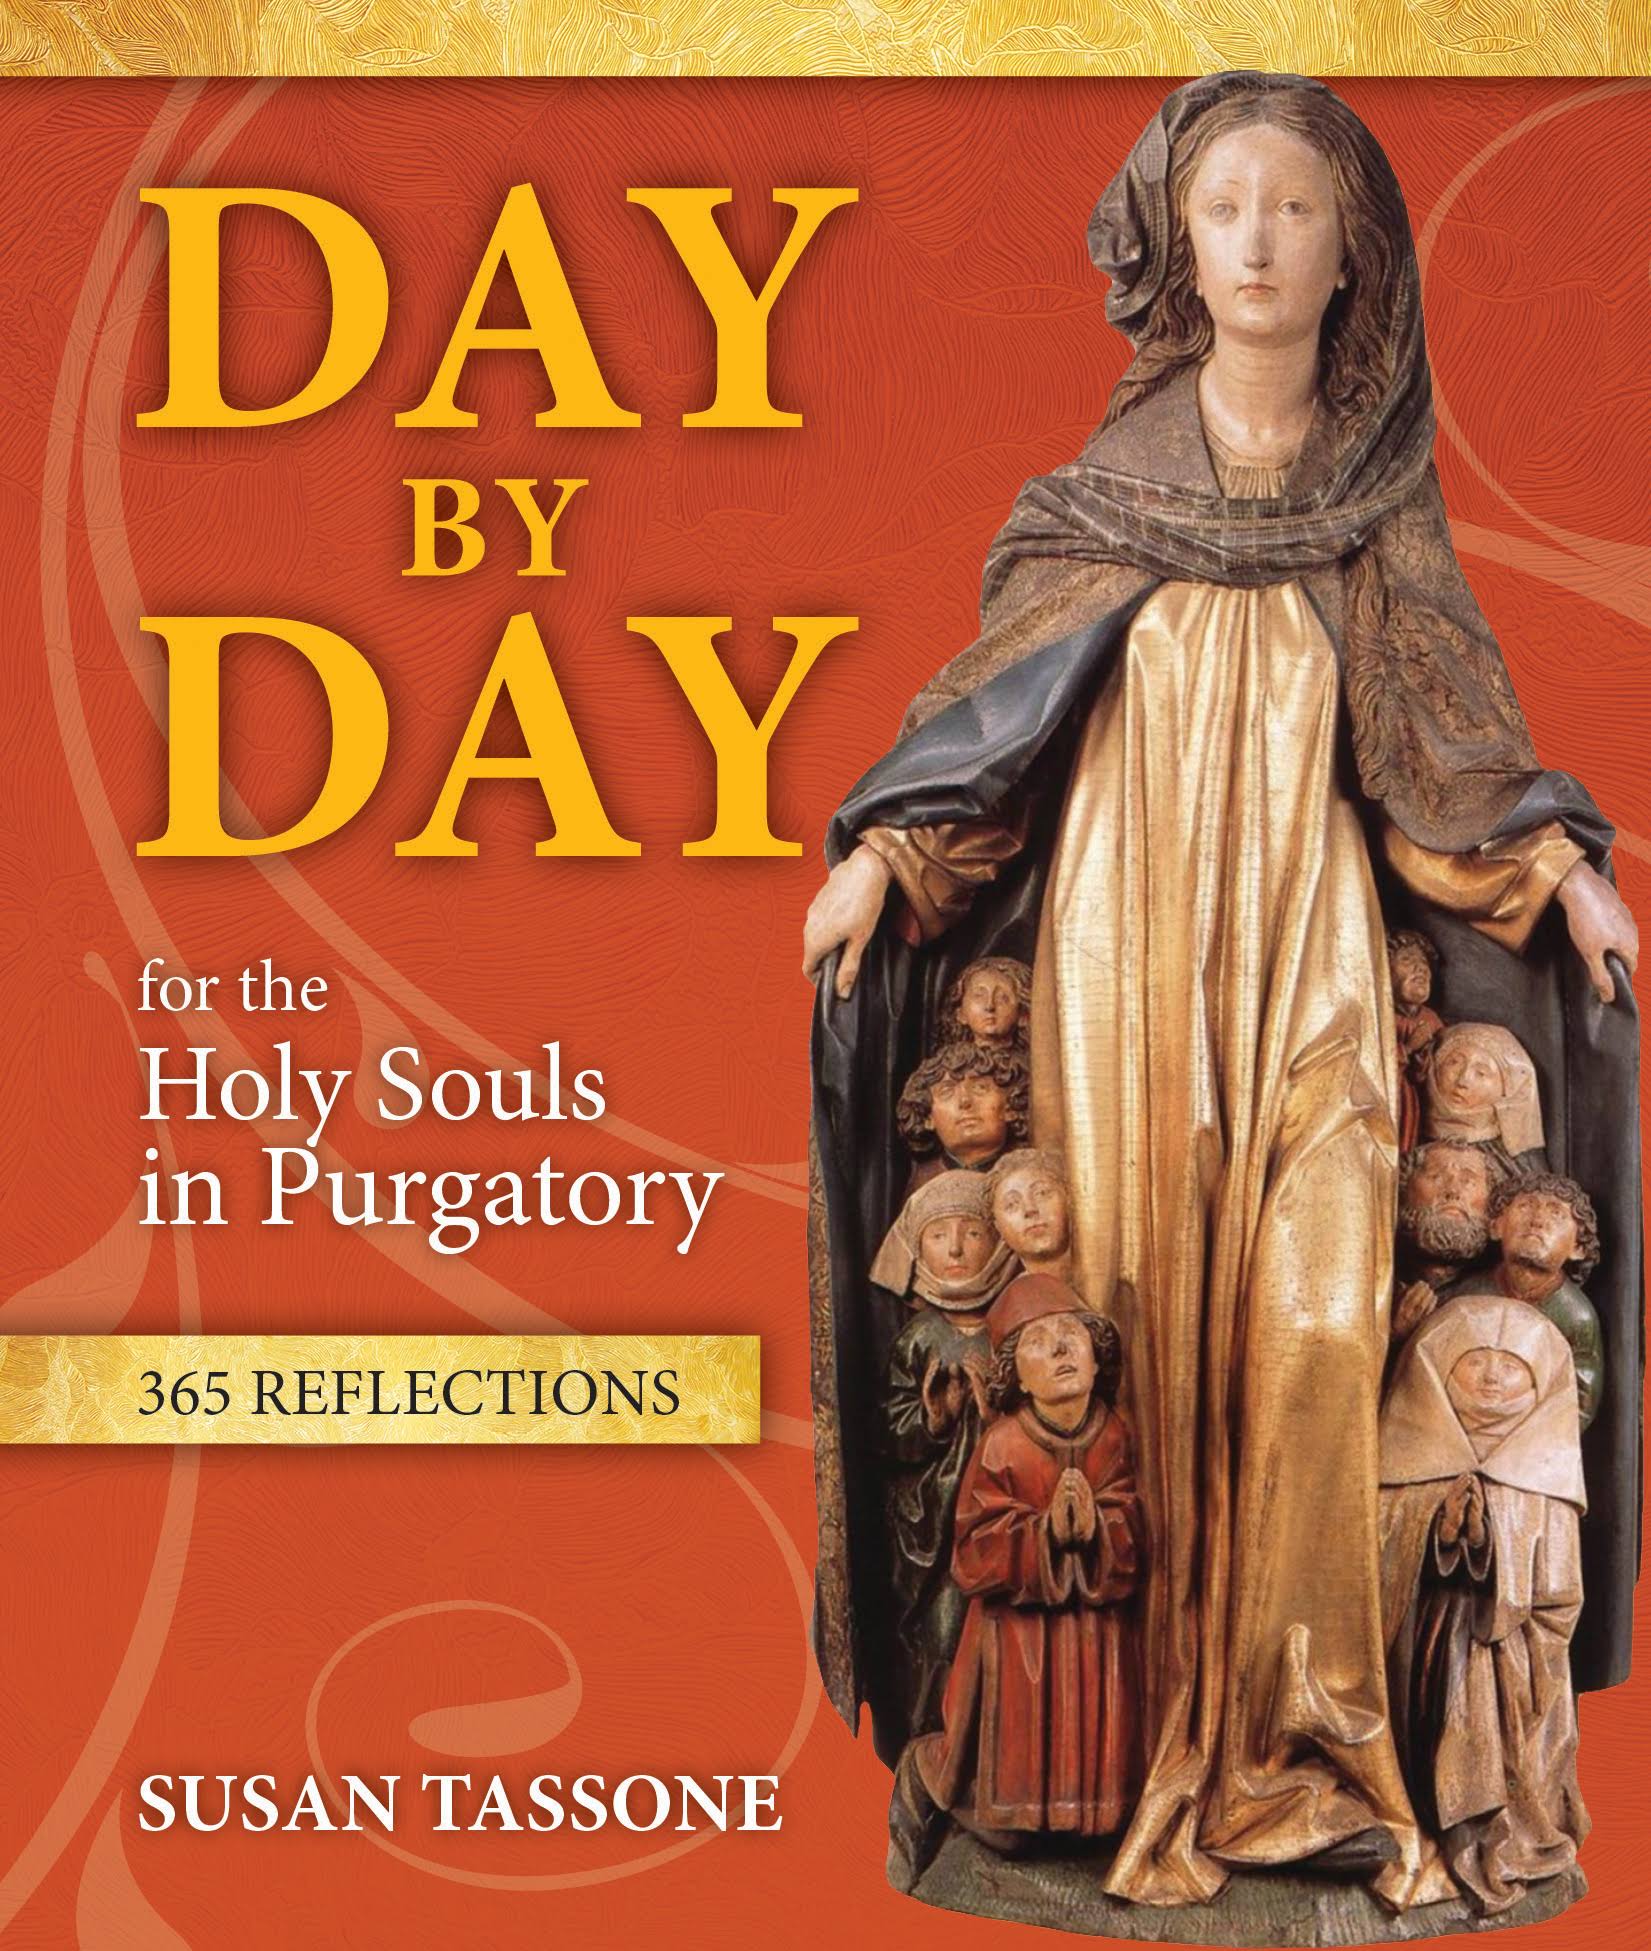 Day by Day for the Holy Souls in Purgatory: 365 Reflections [Book]